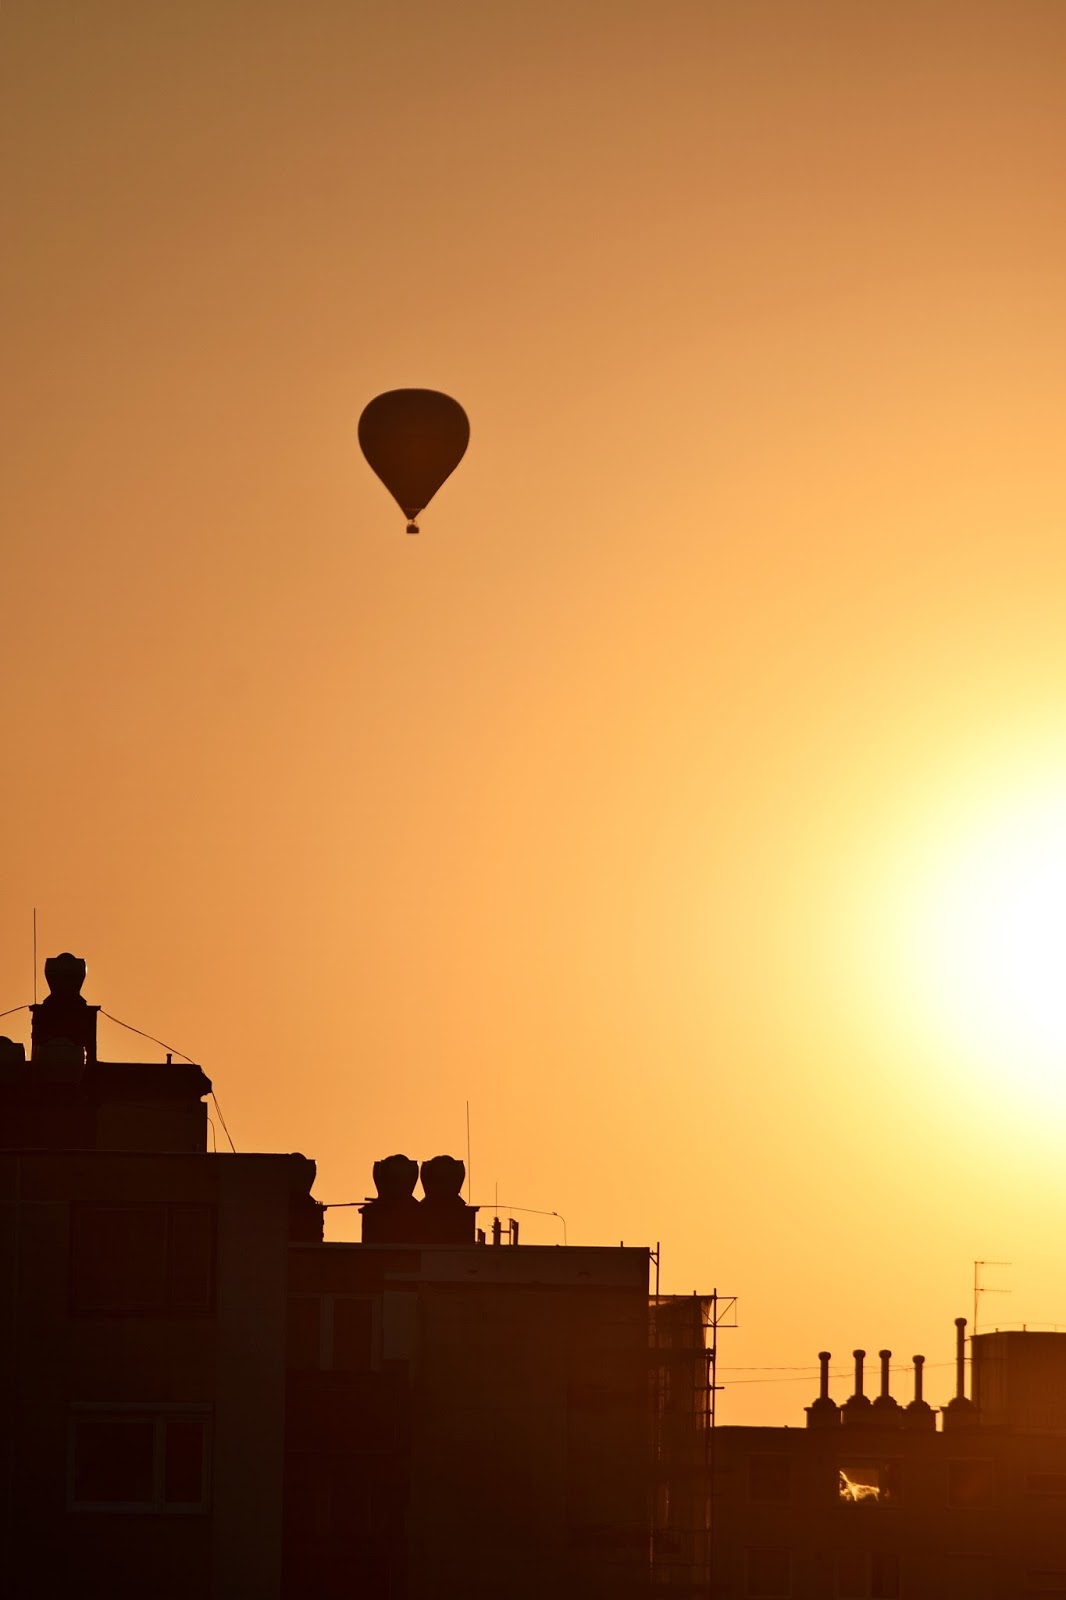 Hot air balloon in the sunset